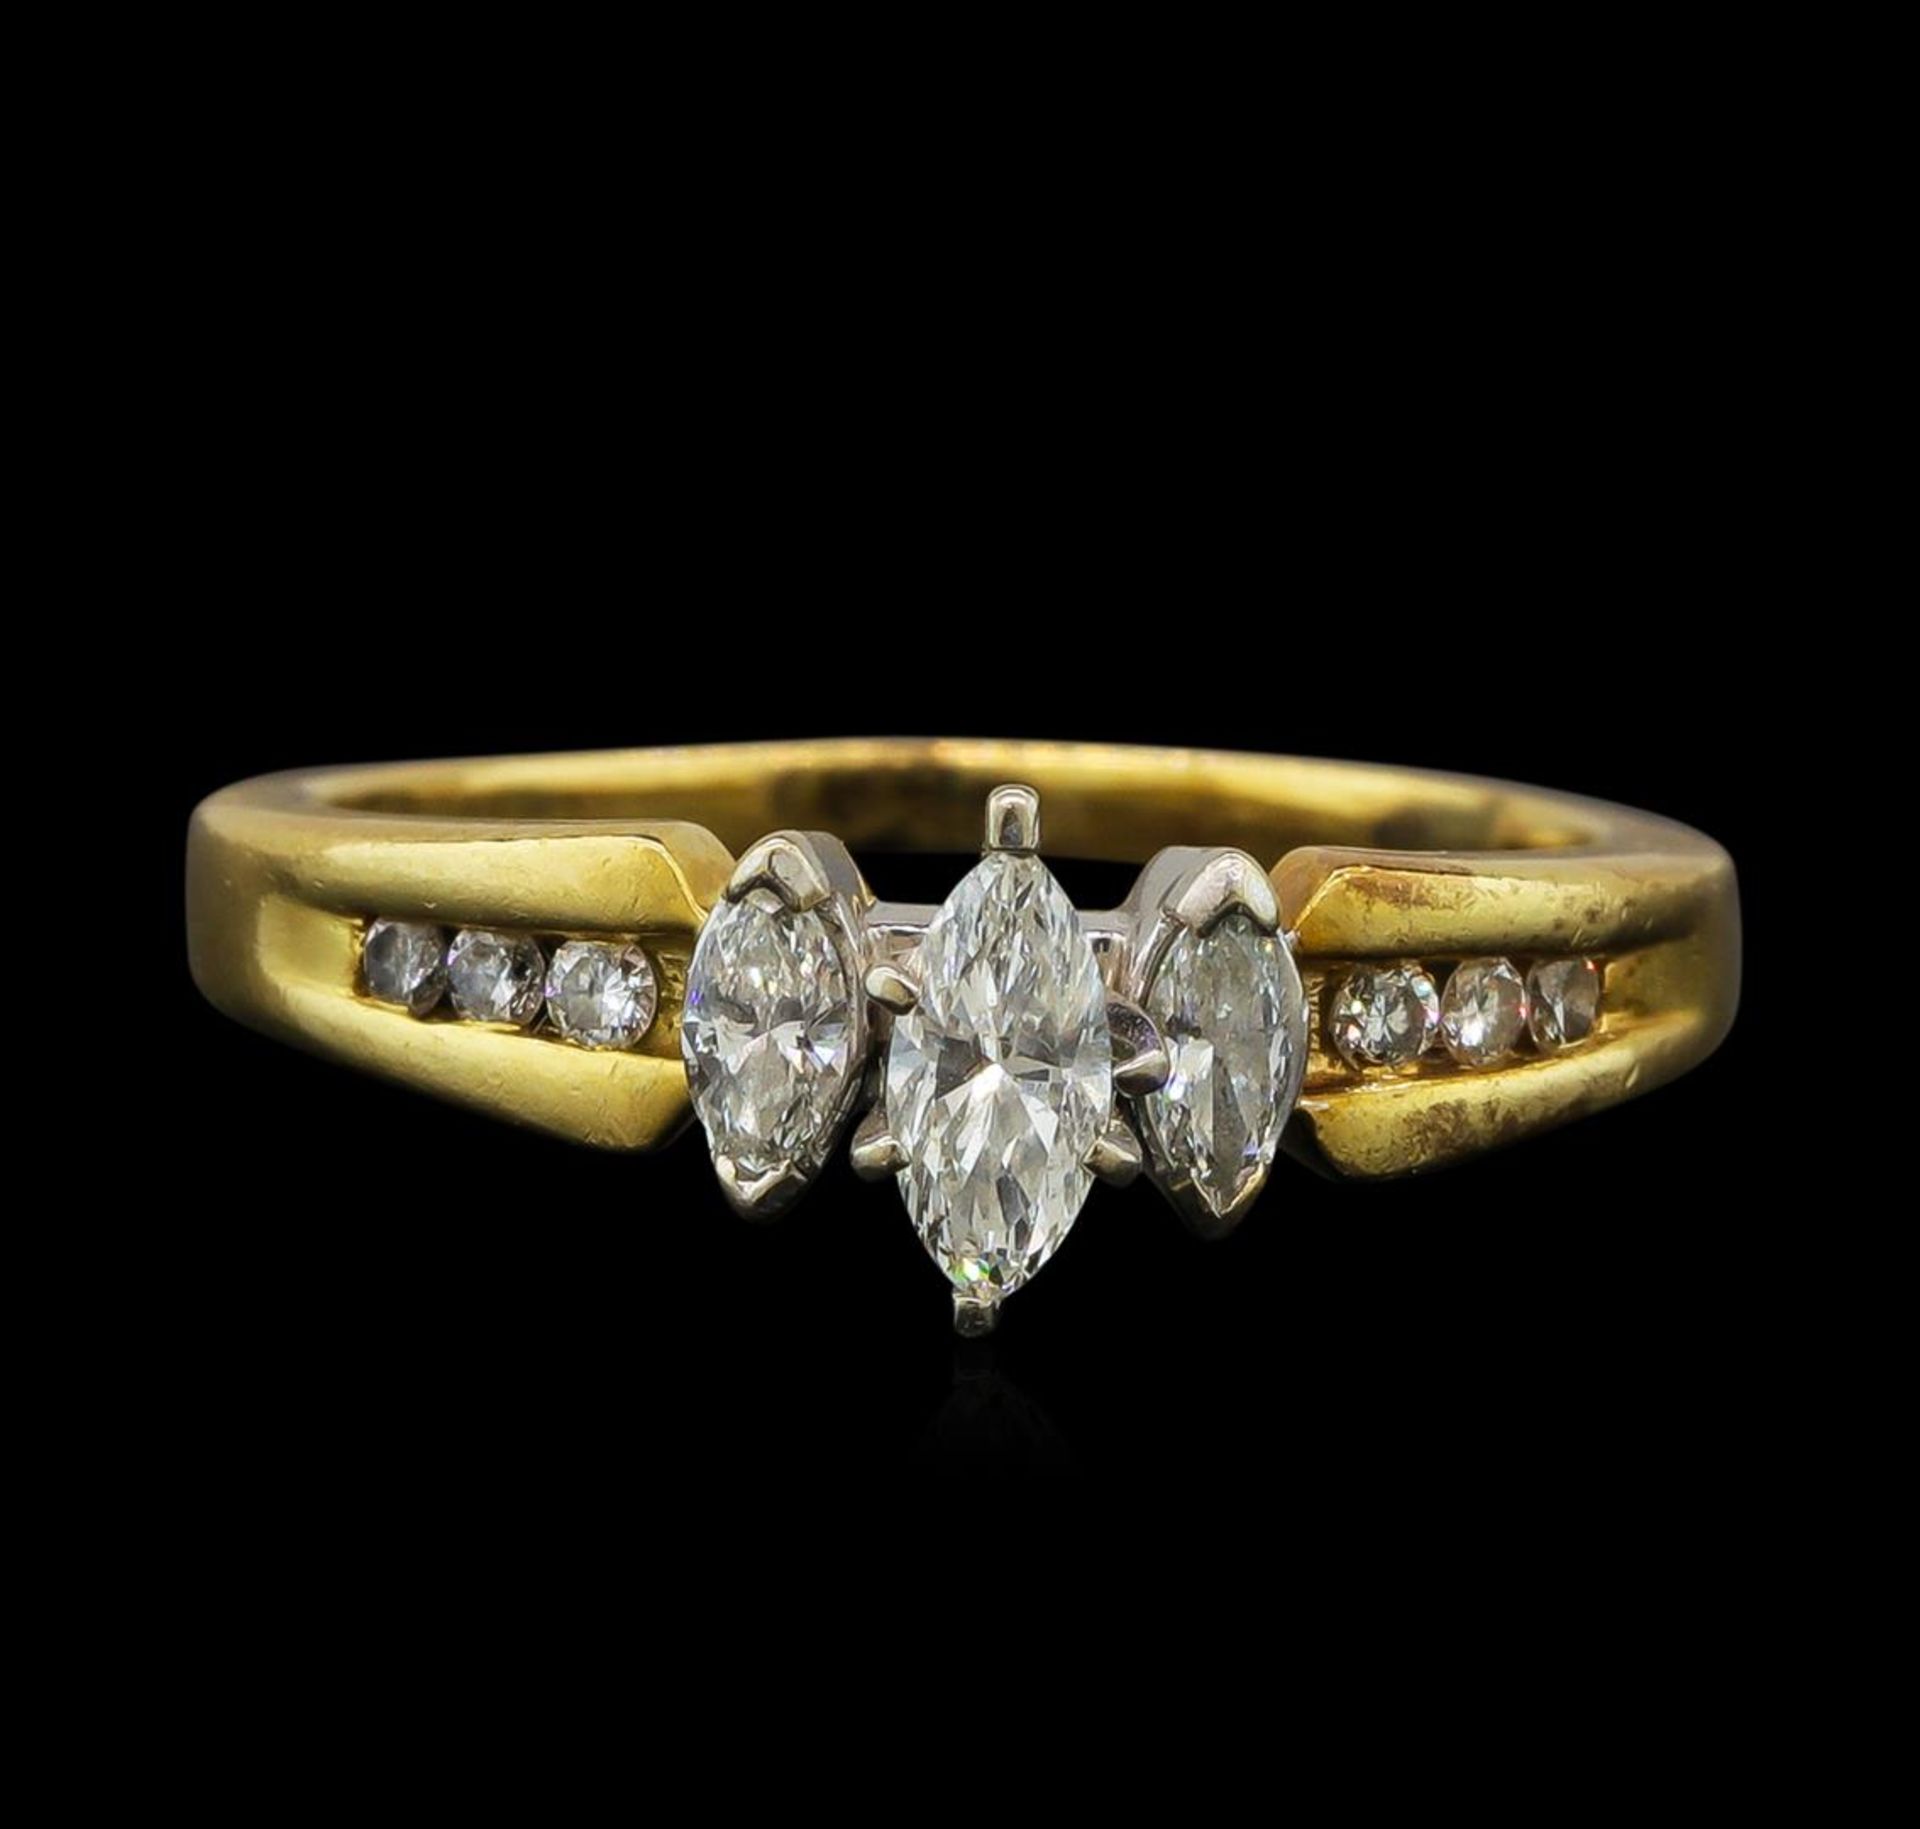 0.53 ctw Diamond Ring - 14KT Yellow and White Gold - Image 2 of 5